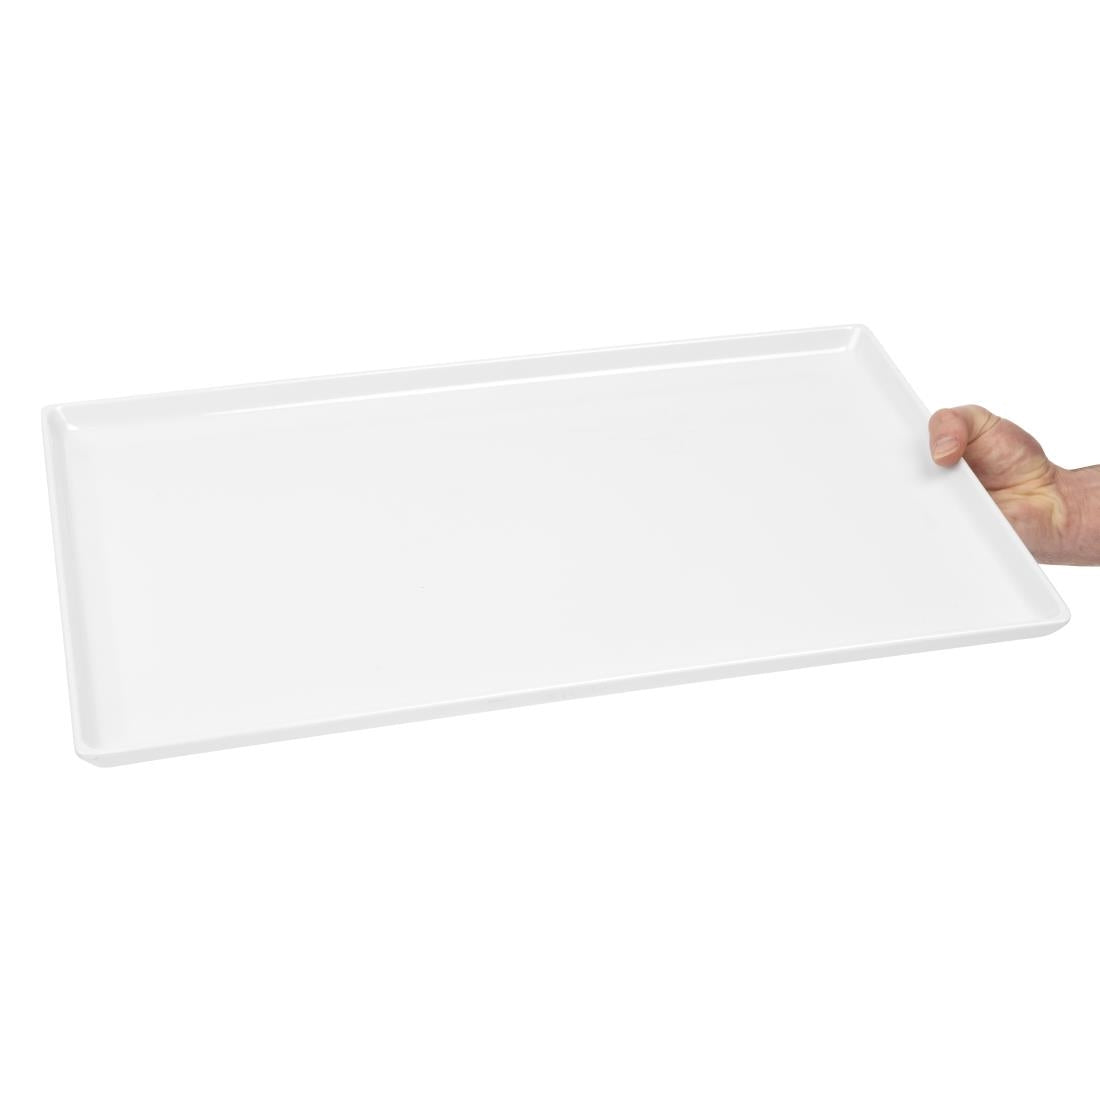 GF074 APS Float Melamine Tray White GN 1/1 JD Catering Equipment Solutions Ltd